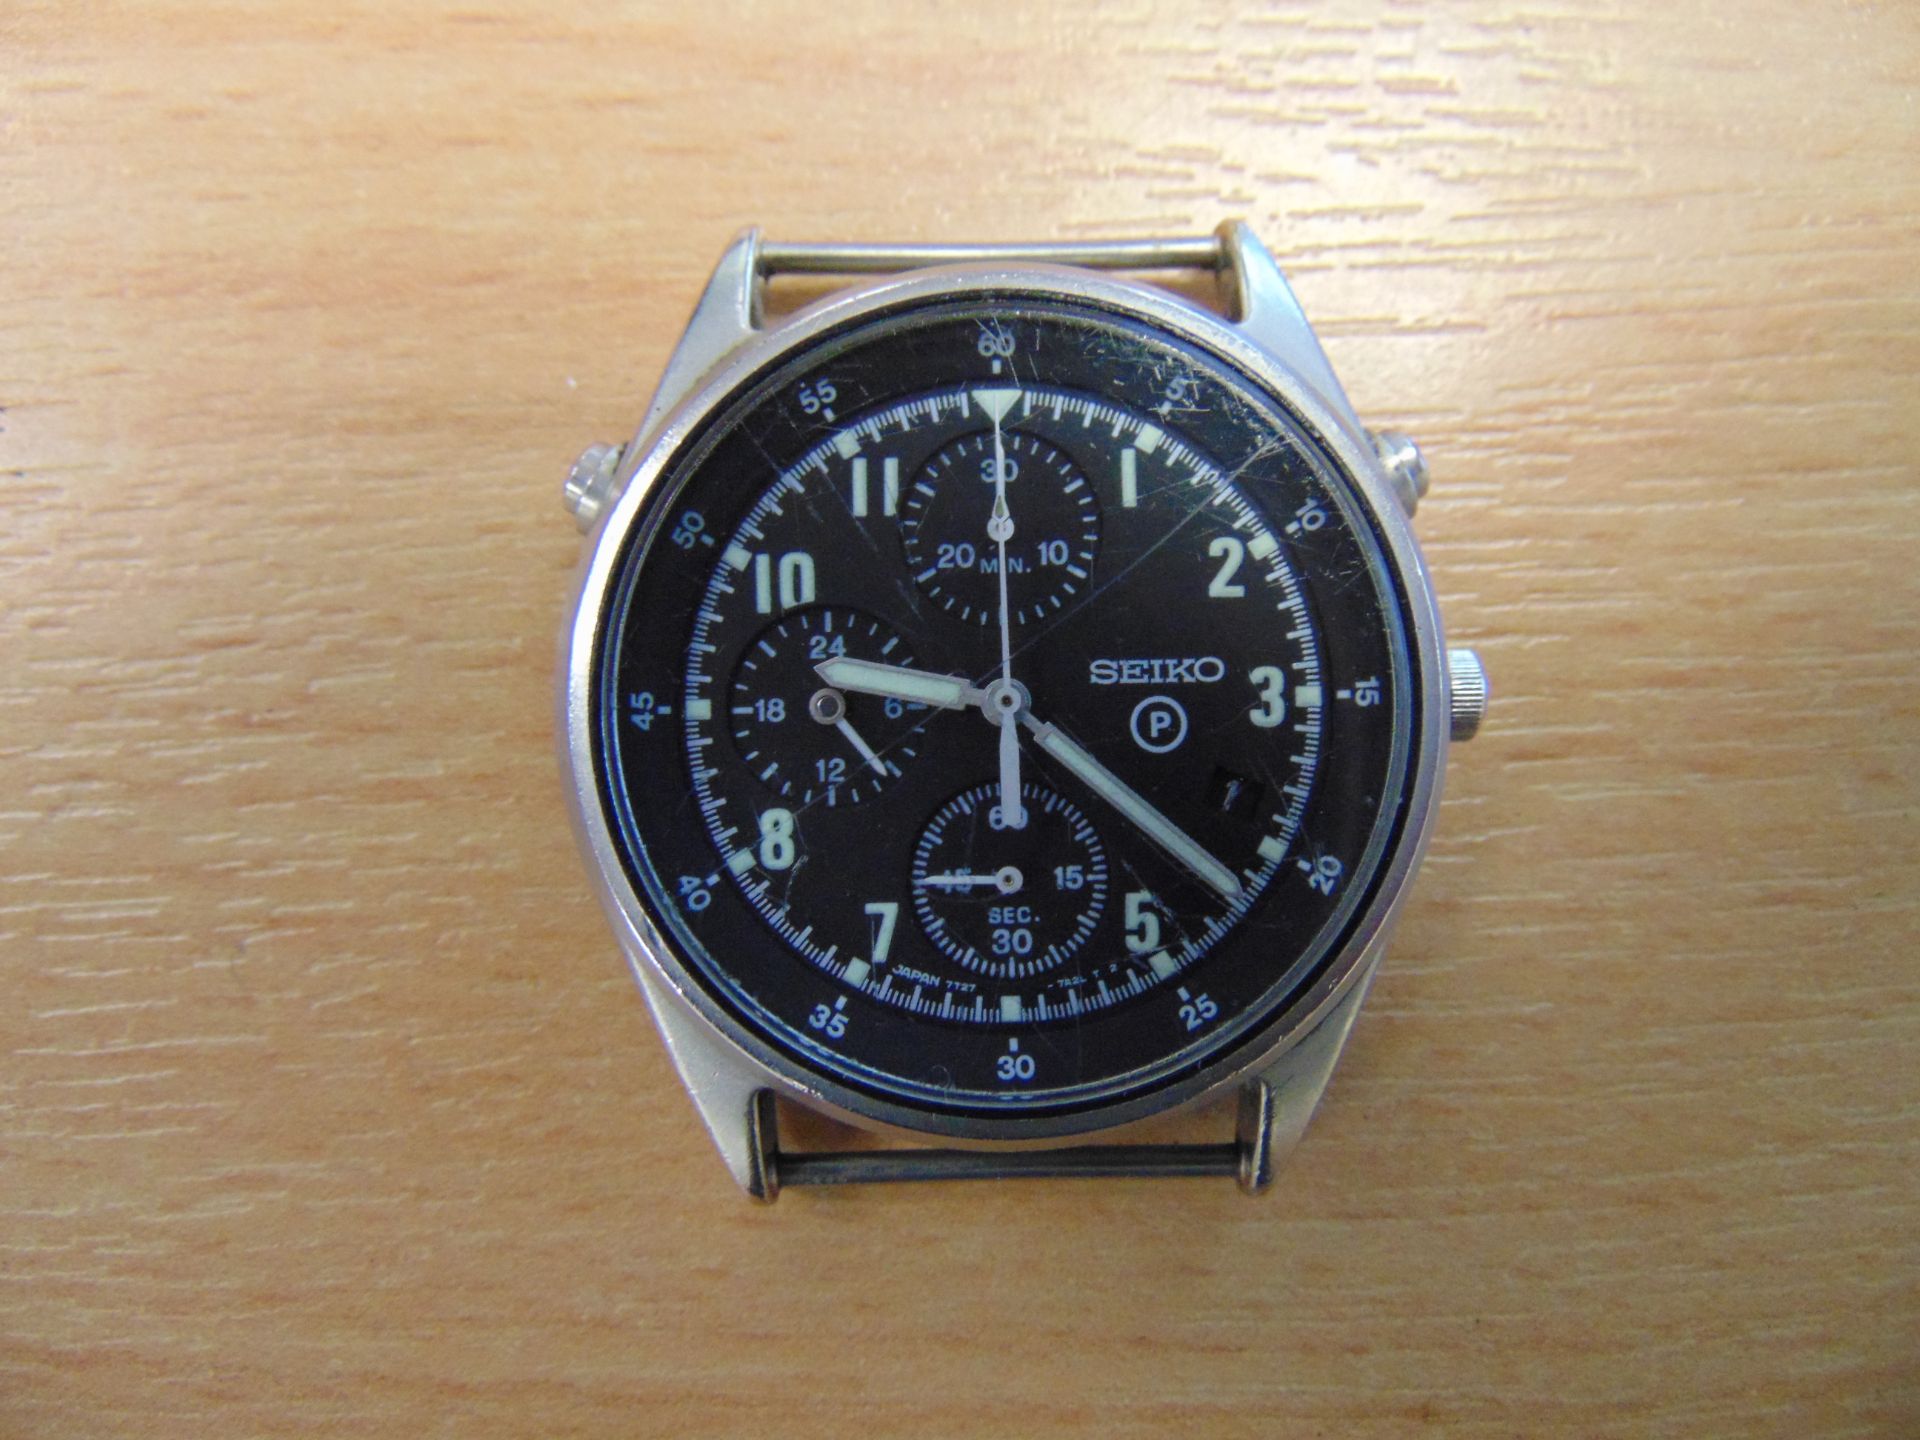 Seiko Gen 2 Pilots Chrono RAF Tornado Force Issue with Date Adjust Nato Marks, LOW SNo 161 - Image 3 of 4